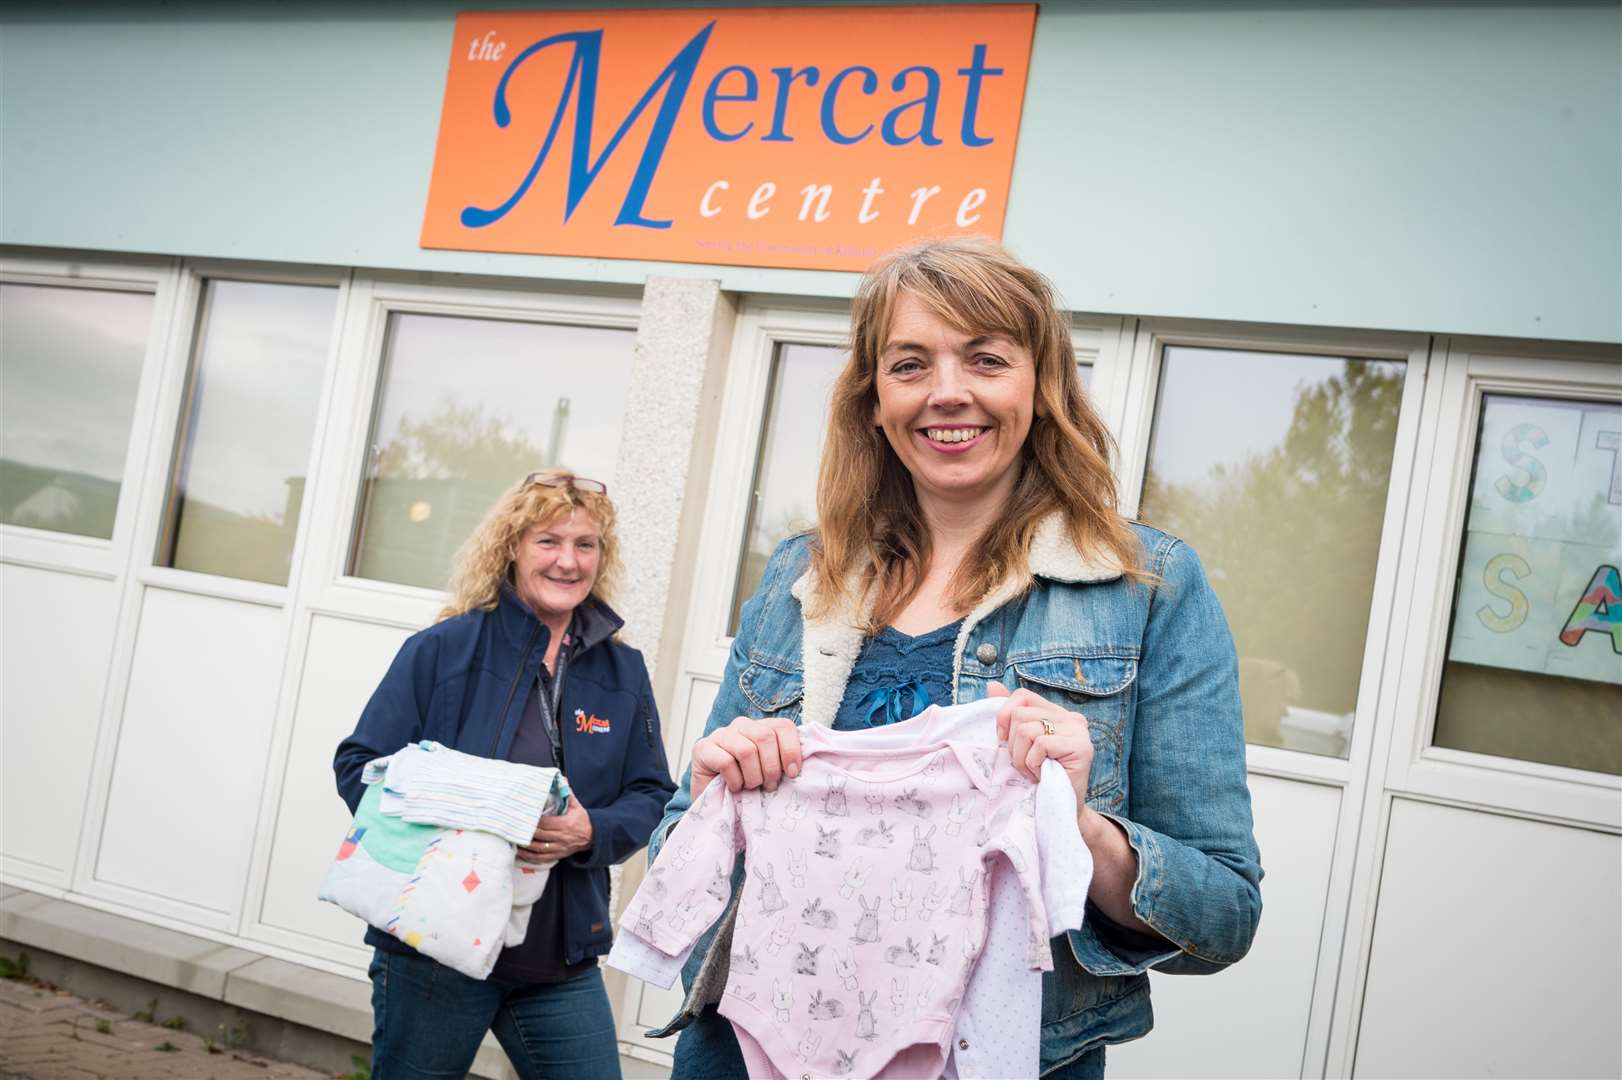 Dawn Aird (right), of Kildary near Tain, is organising a collection of baby clothes for a children's hospital in Yemen. Pictured with Mercat Centre manager Mairi Crow. Picture: Callum Mackay